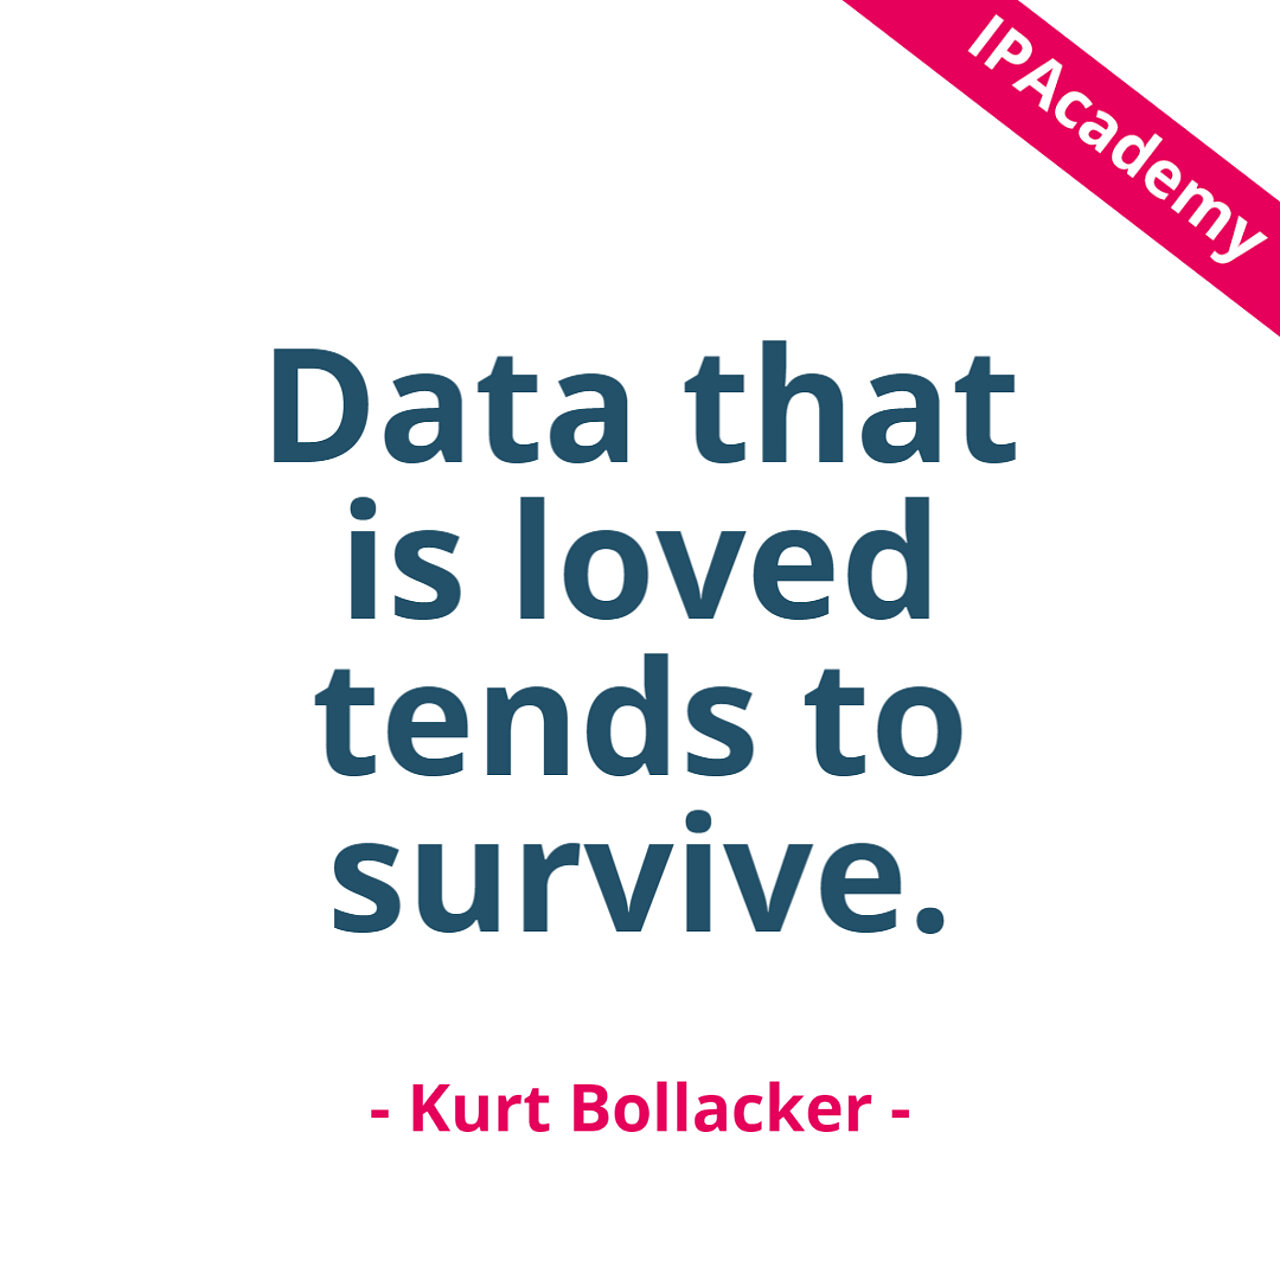 Data that is loved tends to survive